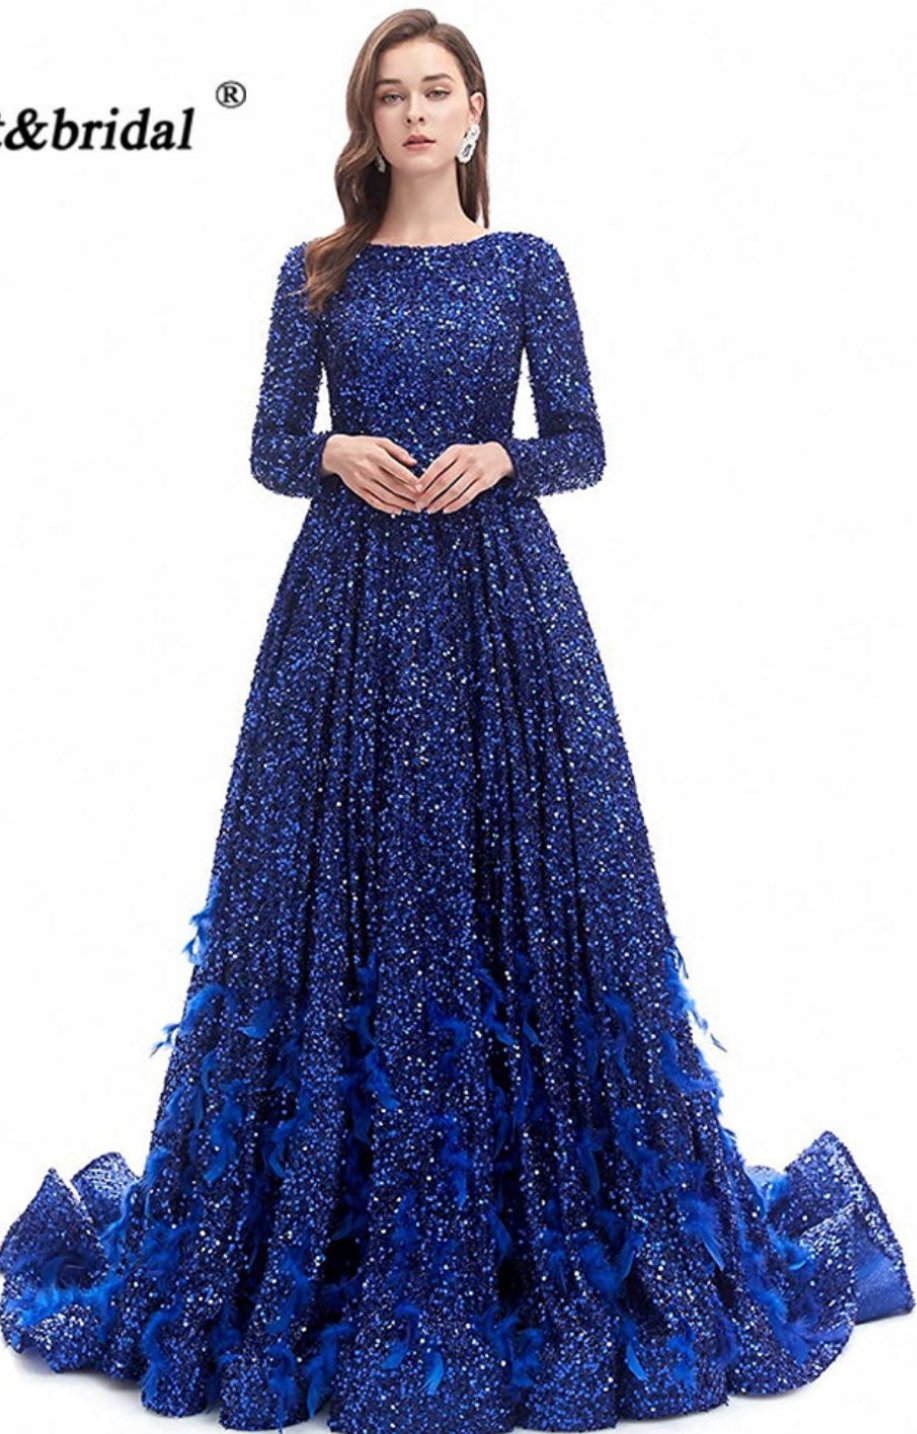 Leanah Luxury Feather Sequin Gown-Royal Blue